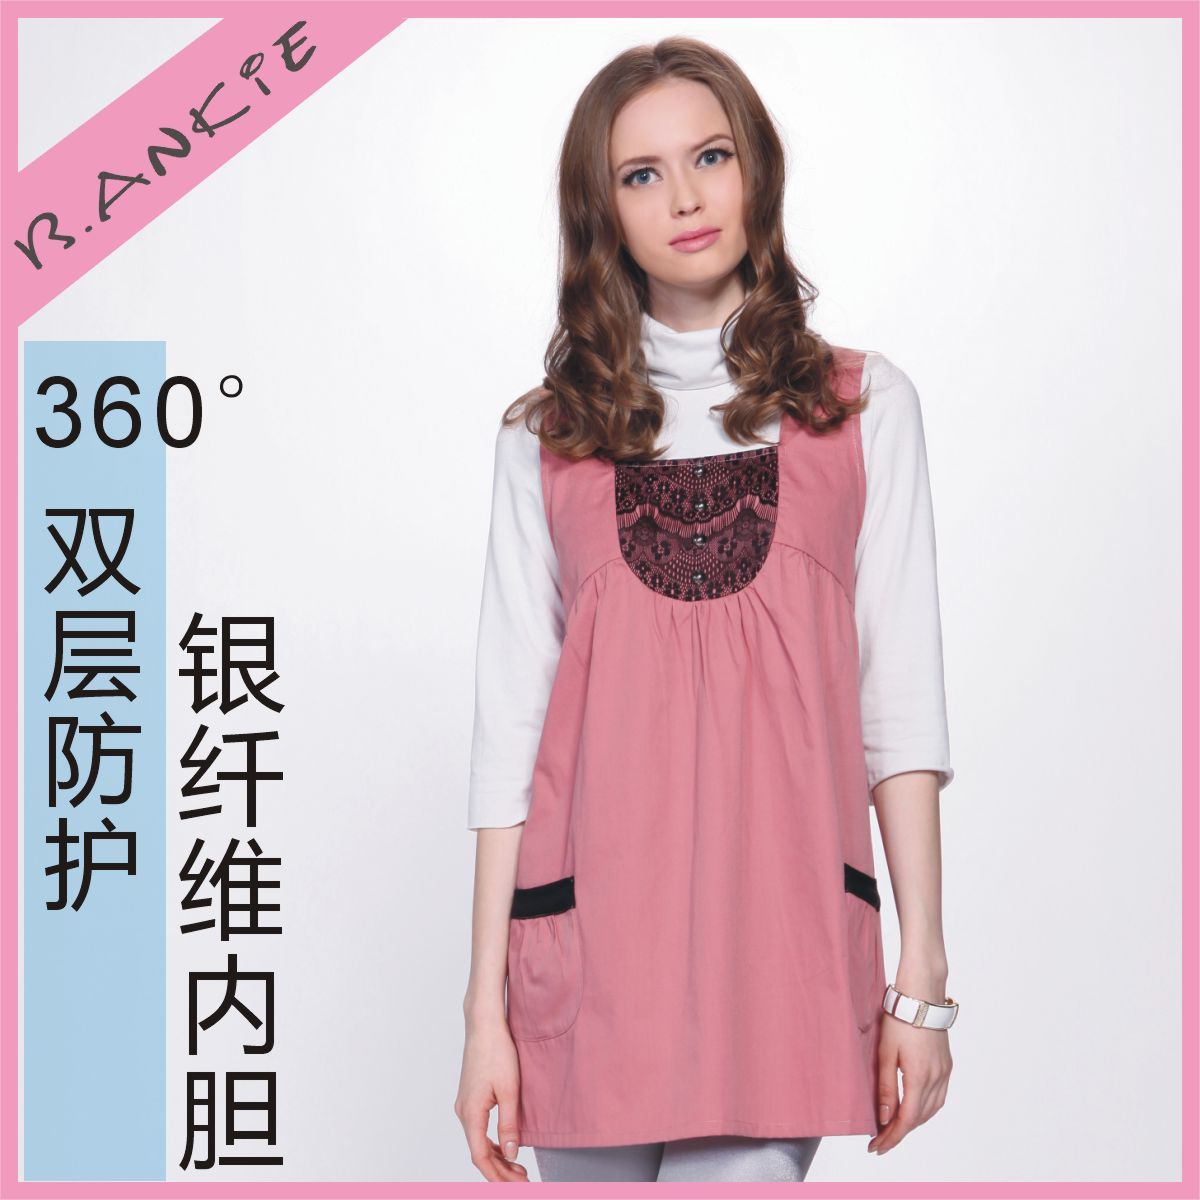 Radiation-resistant maternity clothing radiation-resistant clothes maternity radiation-resistant baq557-y3 ring silver liner